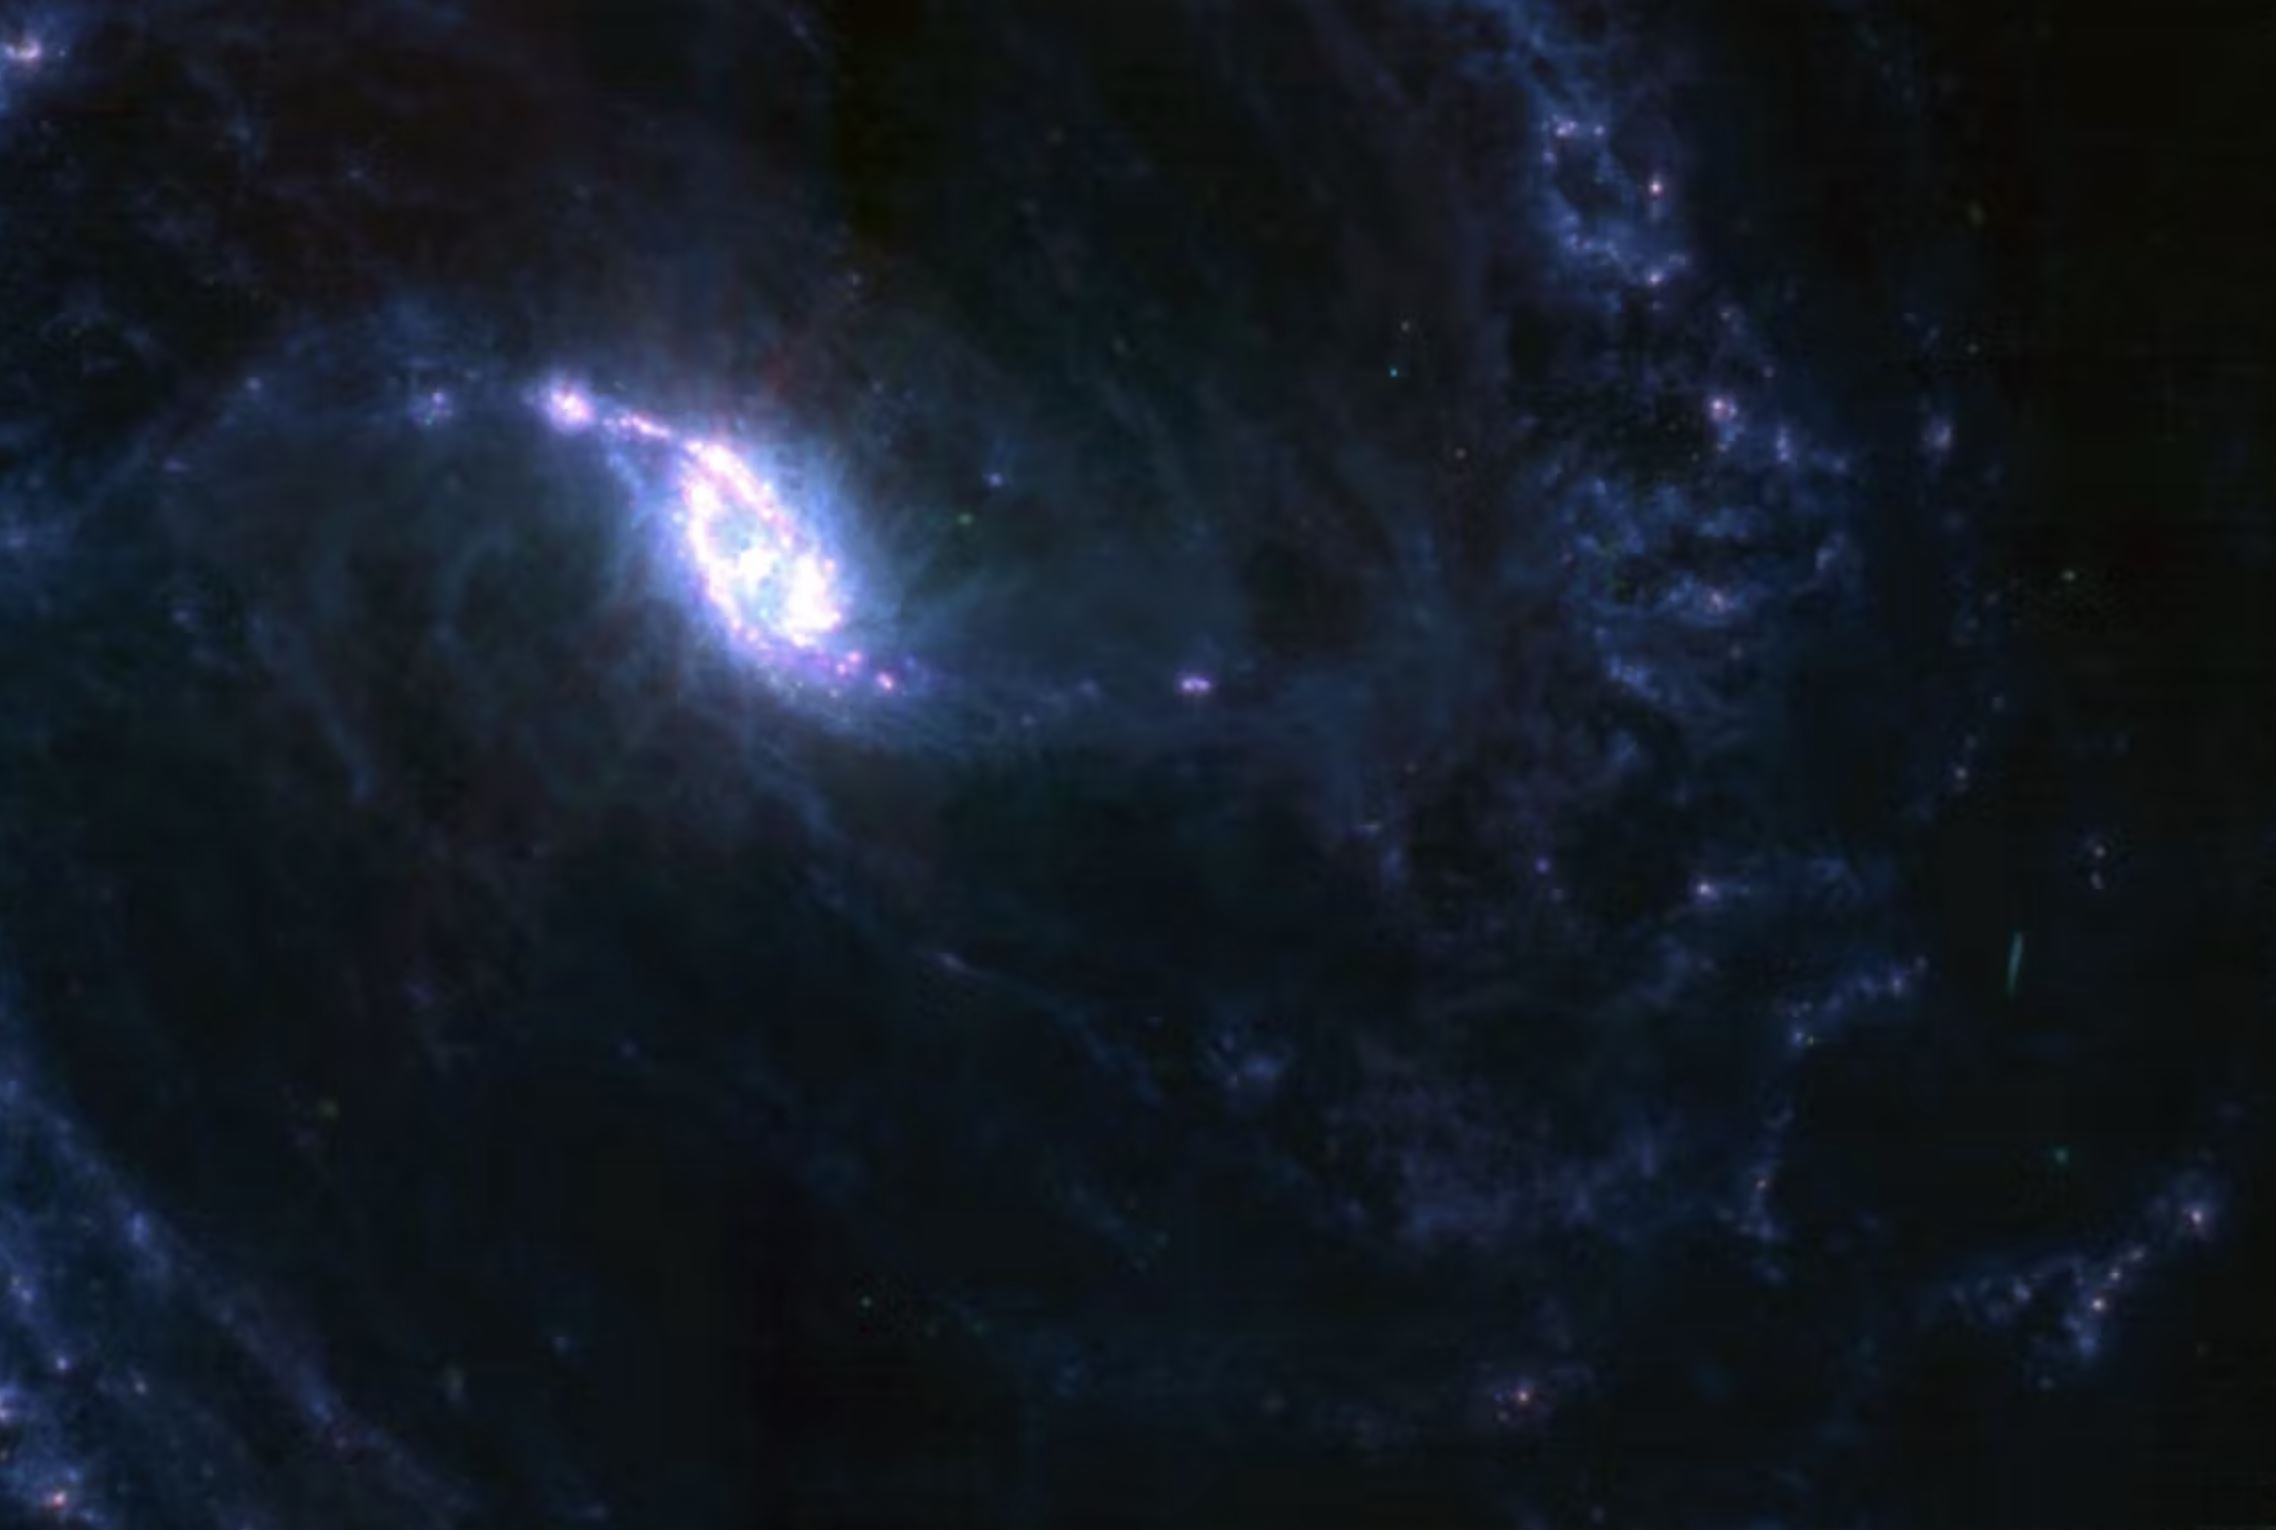 A photograph of NGC 1365 taken by the James Webb MIRI instrument. This image shows a longer-wavelength mid-infrared view. Image Credit: NASA, ESA, CSA, STScI. Processed by: u/SpaceGuy44.